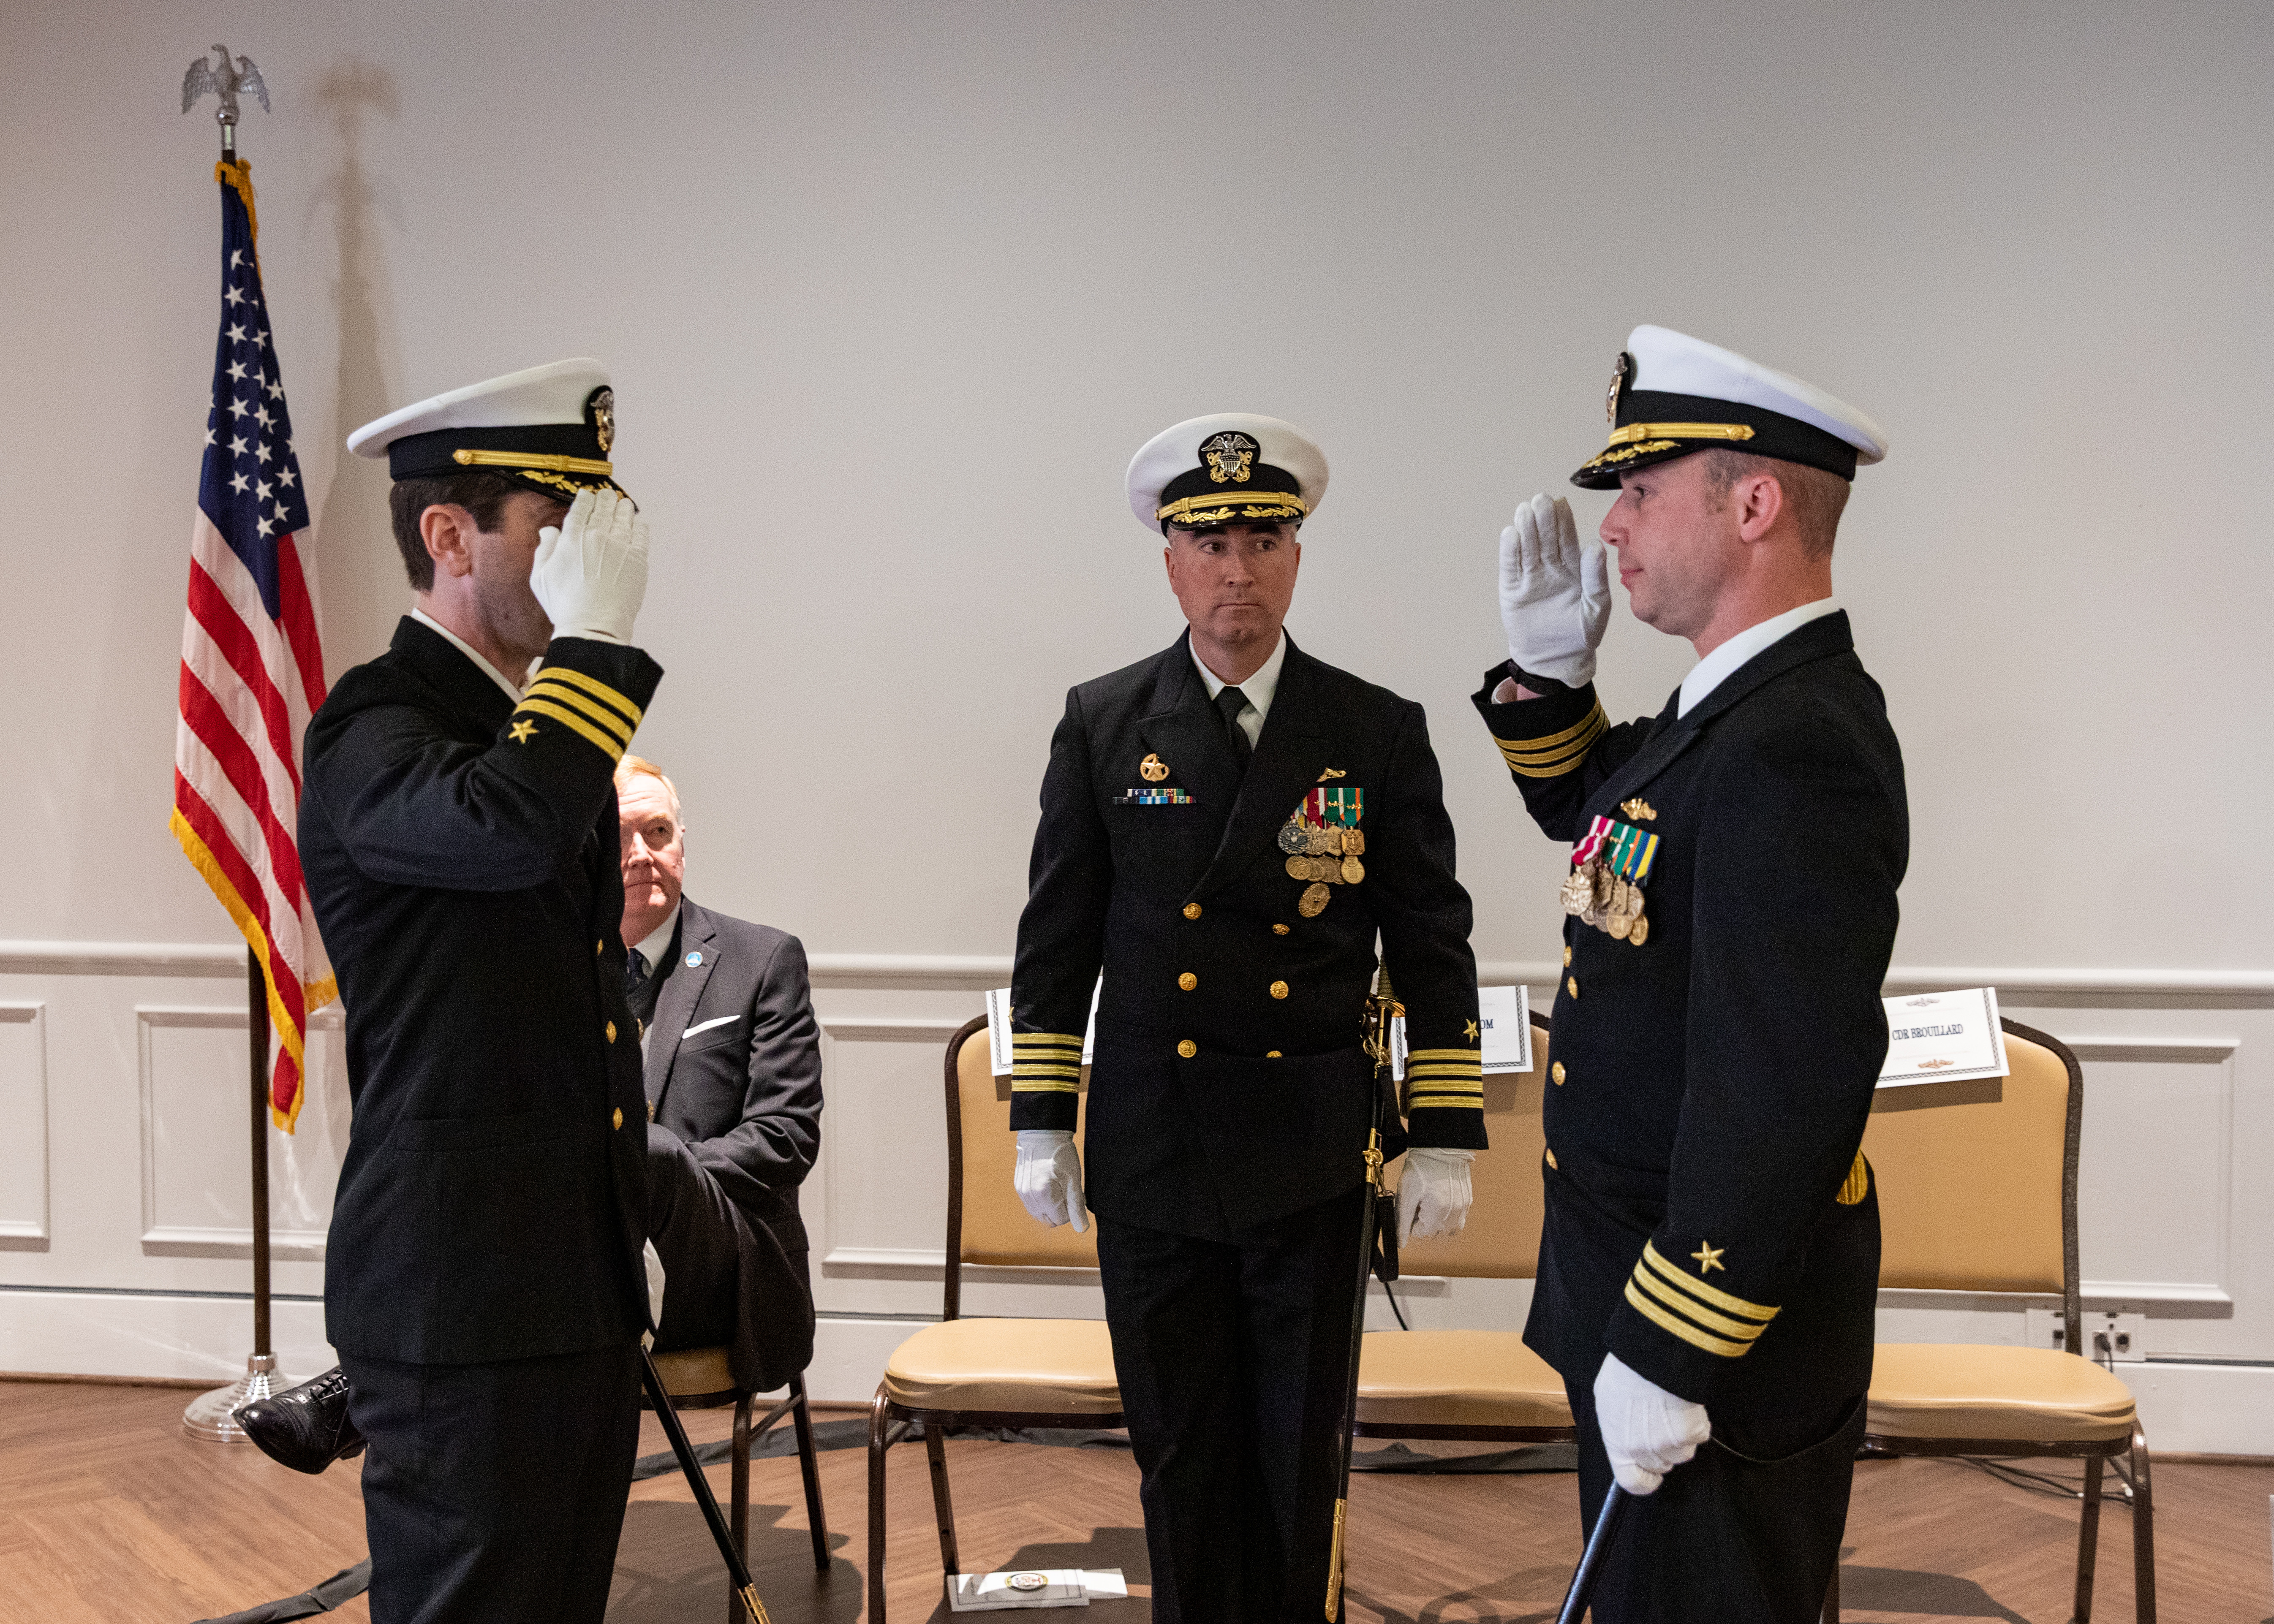 Capt. Brian Hogan, commodore, Submarine Squadron Eight, center, watches as Cmdr. Jonathan Ahlstrom, right, is relieved by Cmdr. Matthew Brouillard, left, during a change of command ceremony for the Los Angeles-class fast attack submarine USS Columbus (SSN 762) at Mariners’ Museum and Park in Newport News, Va., Dec. 14.